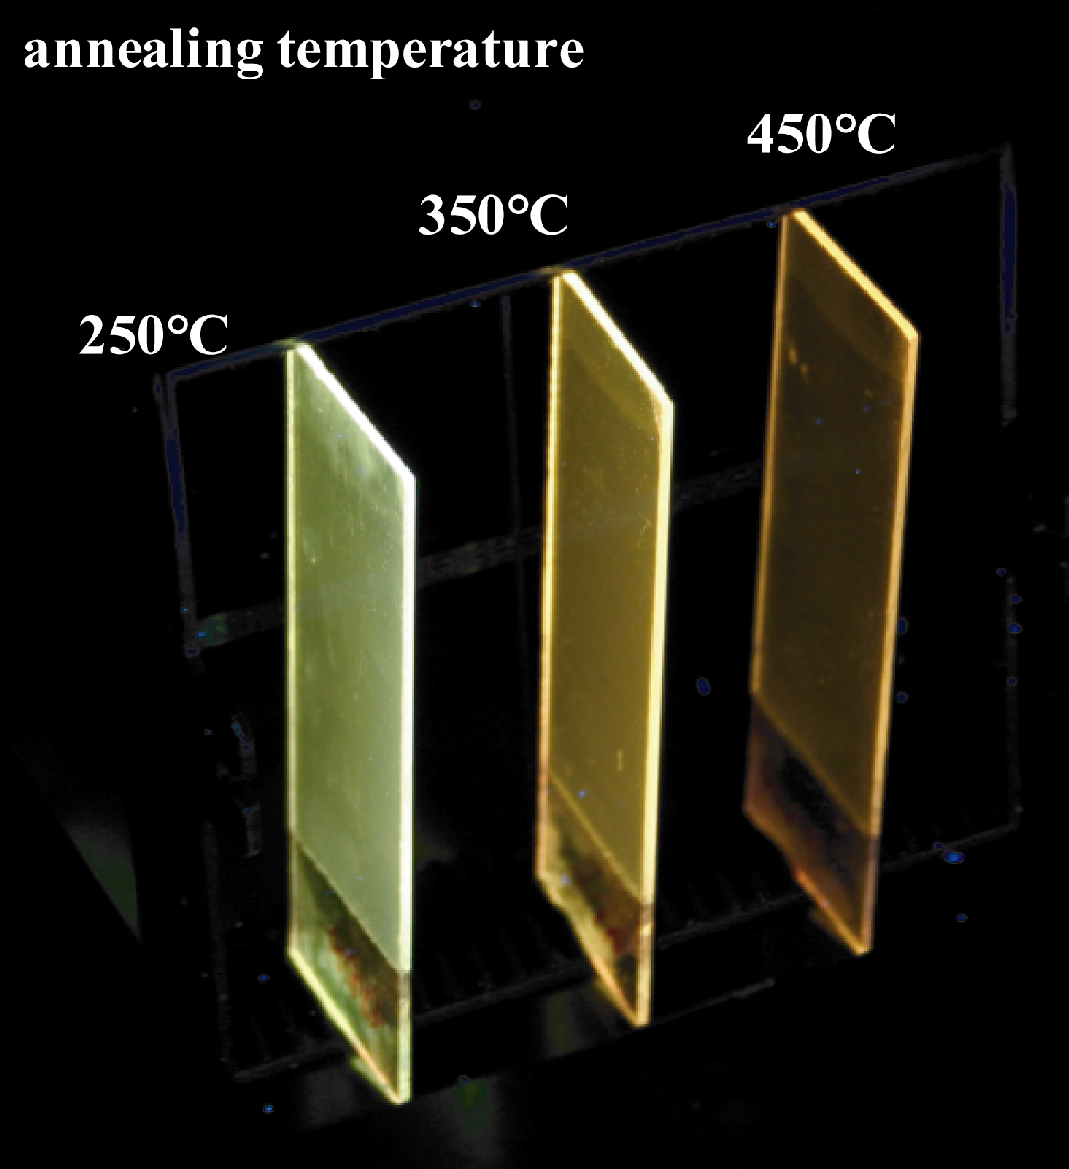 samples at different annealing temperatures